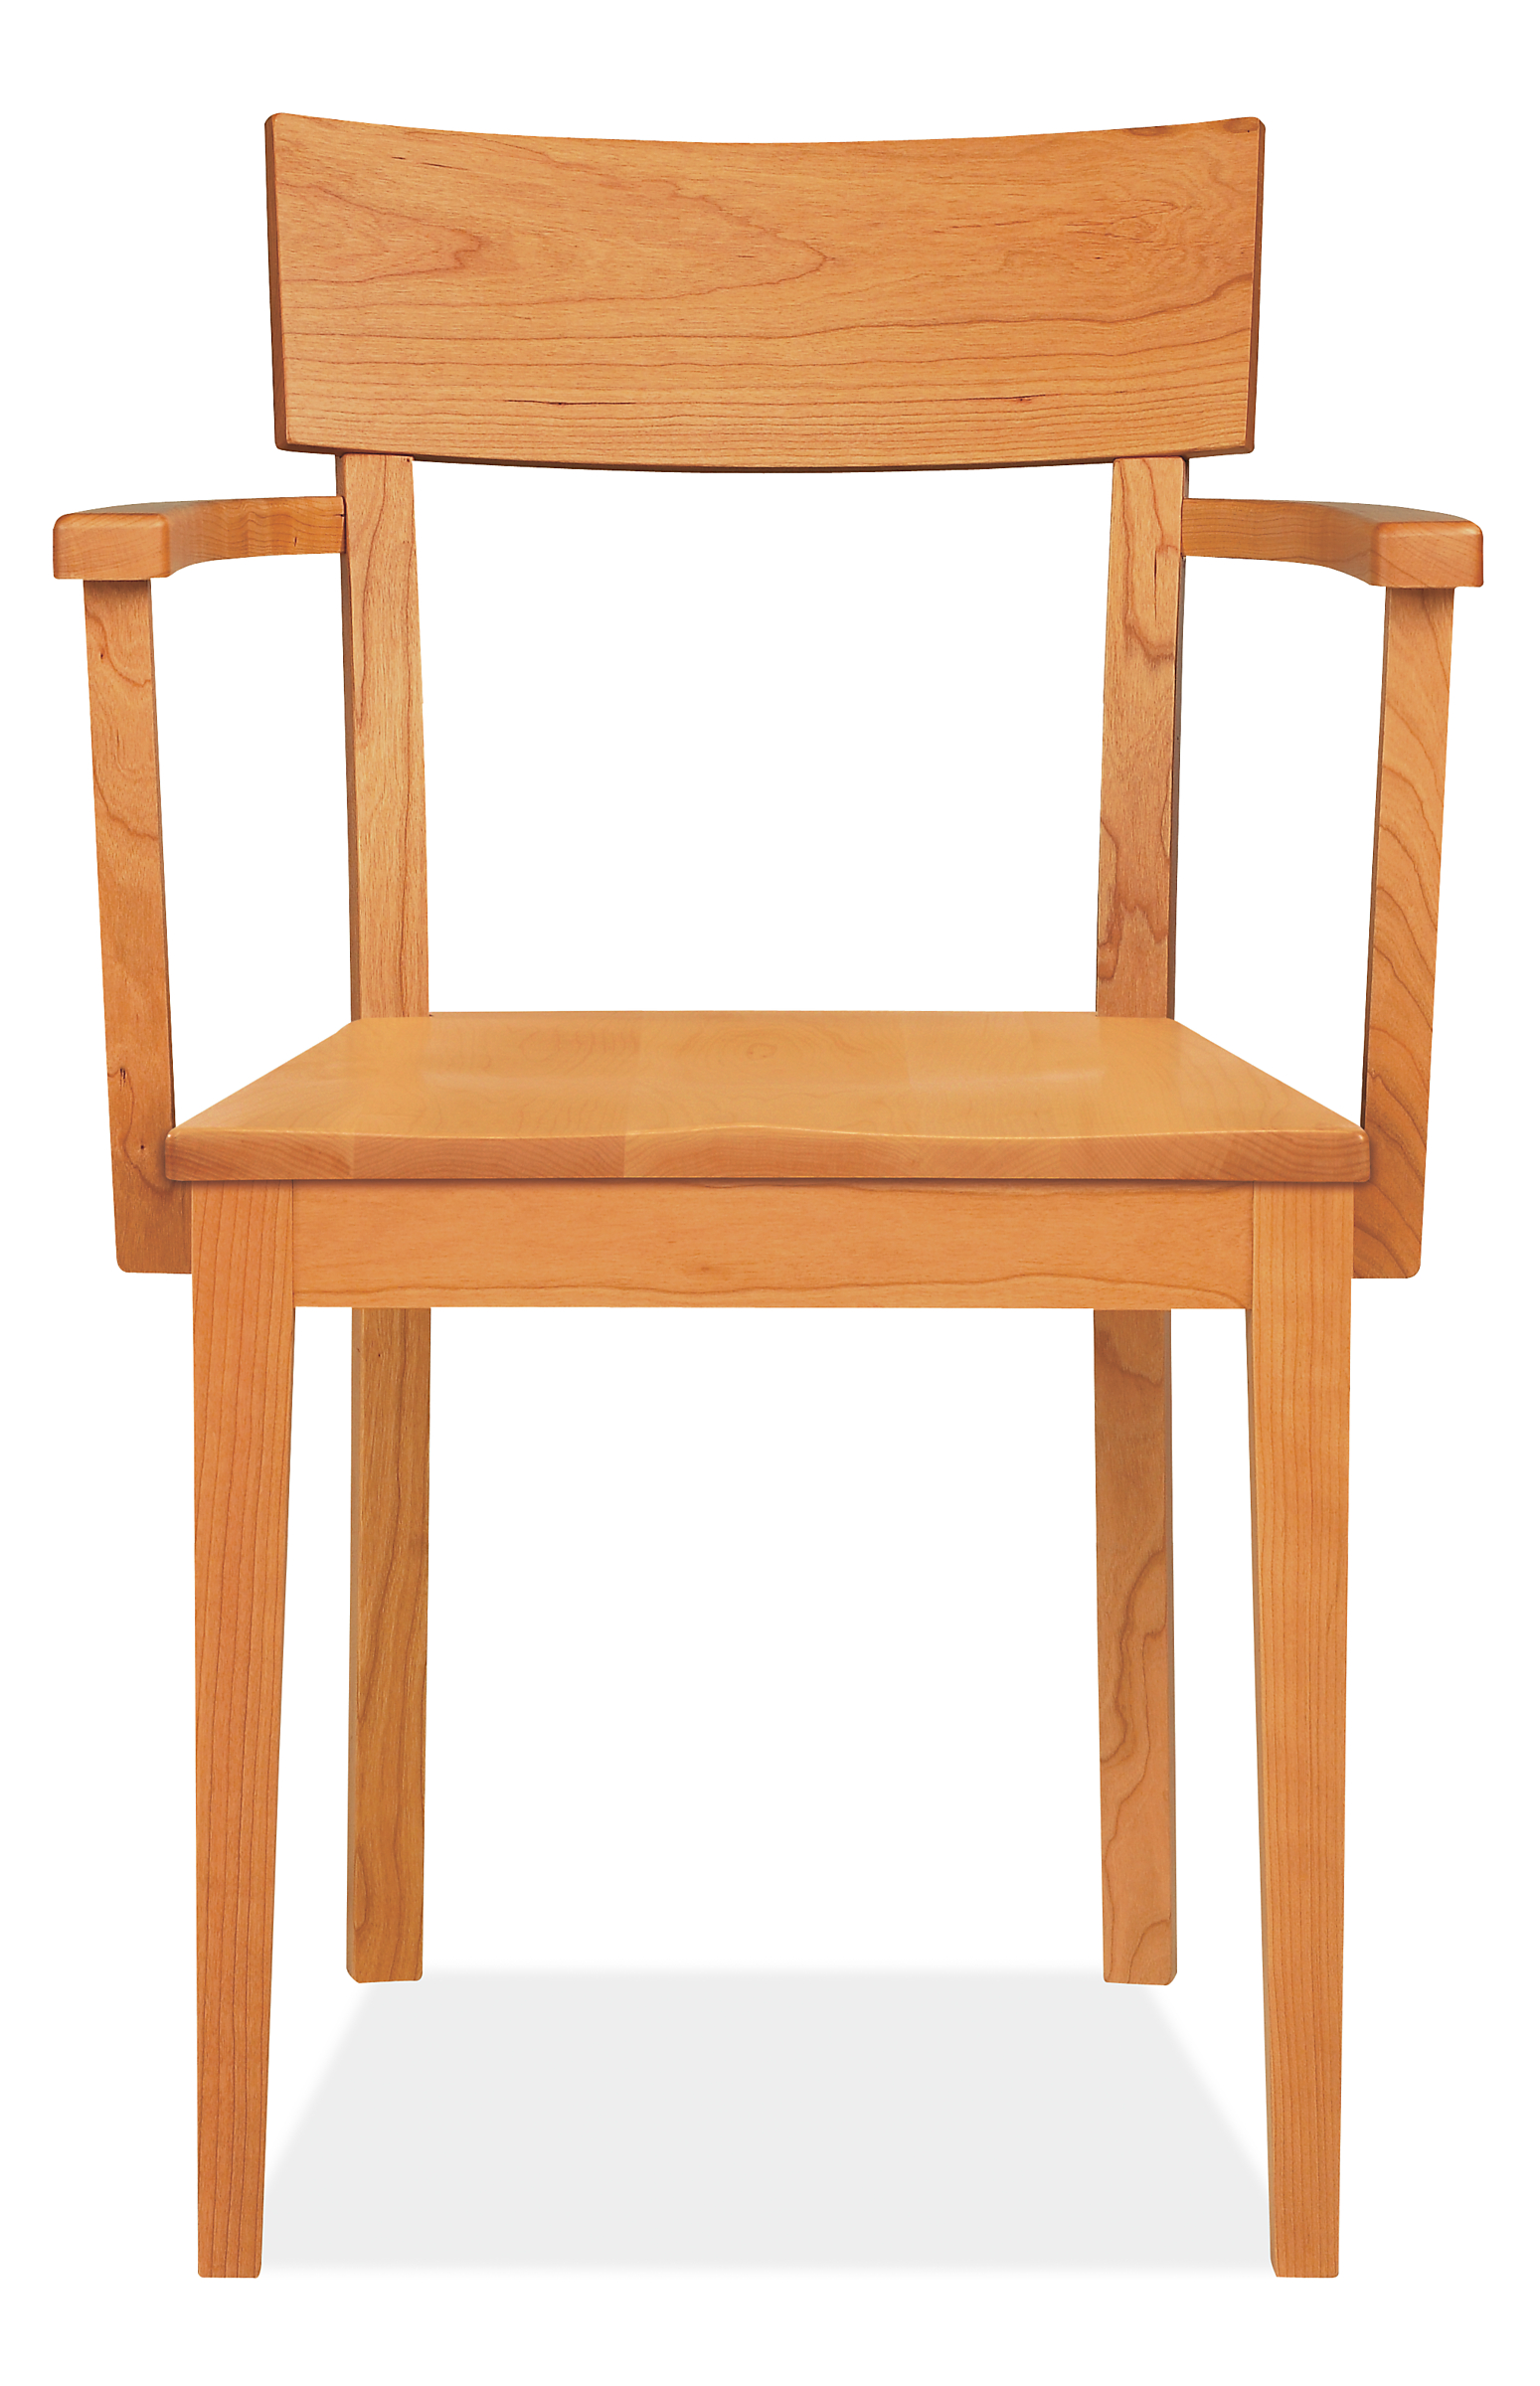 Front view of Doyle Arm Chair with Wood Seat.